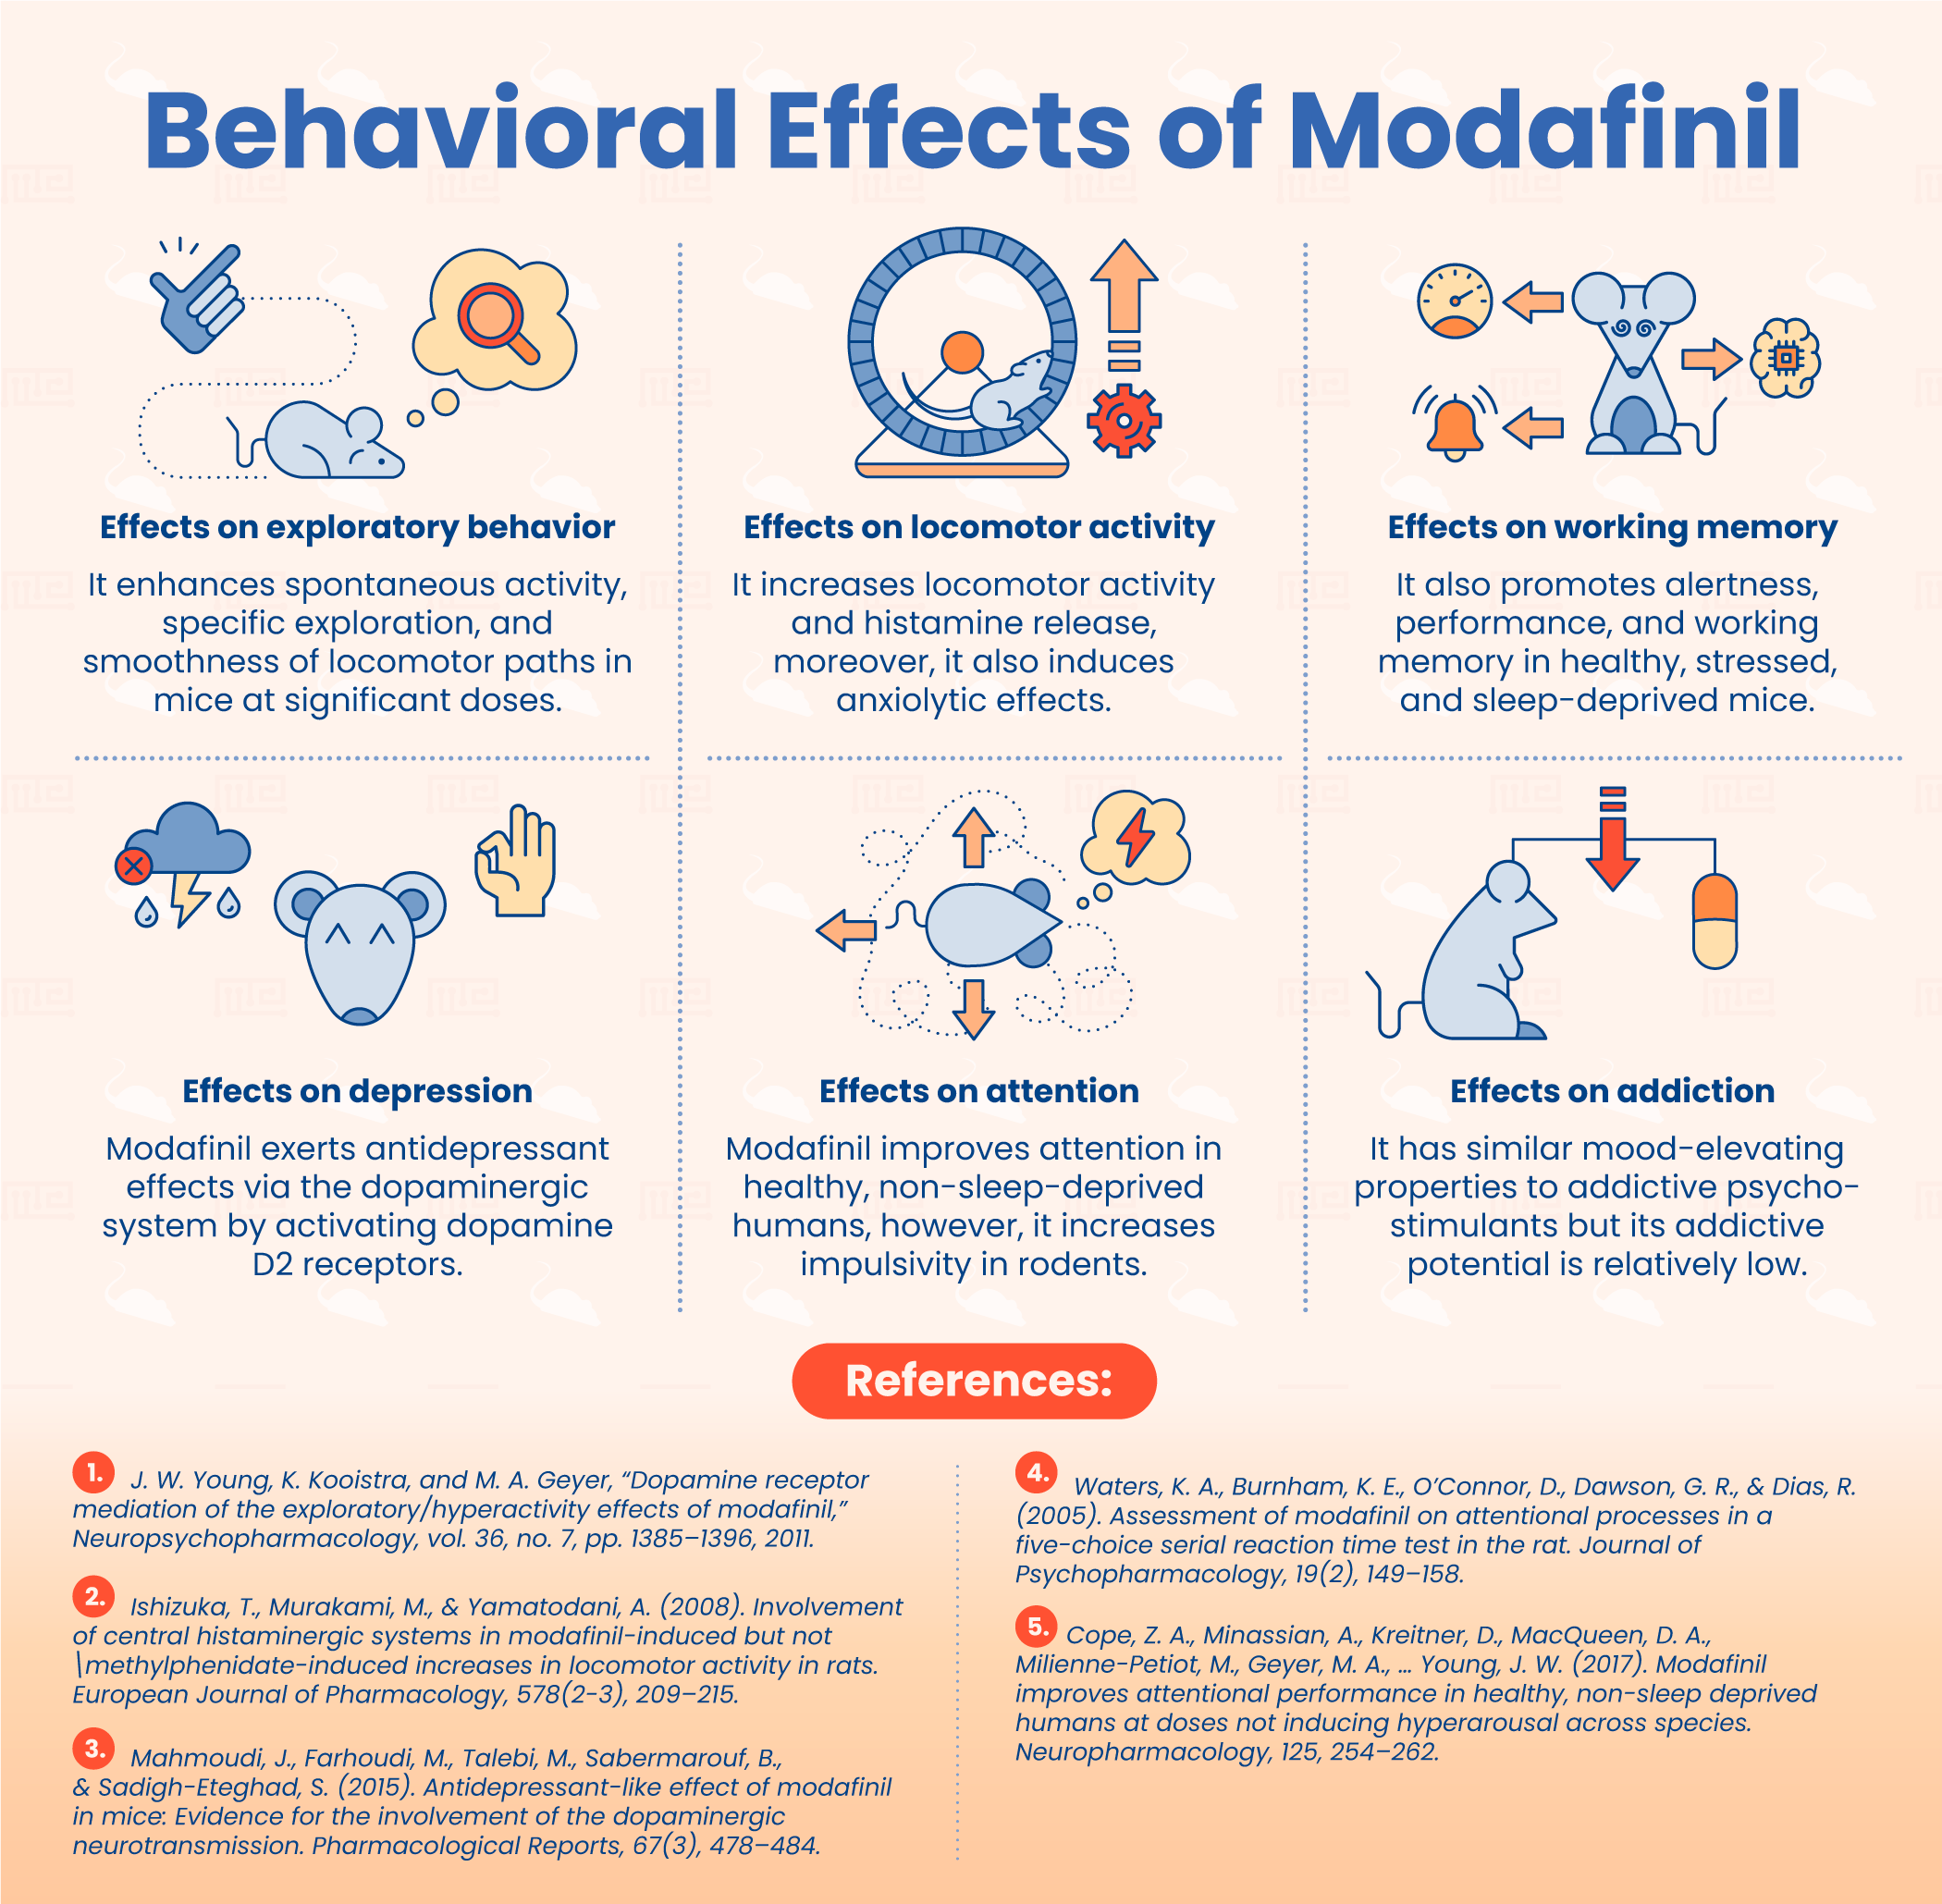 Modafinil Vs Adderall: Which Is Safer To Use?